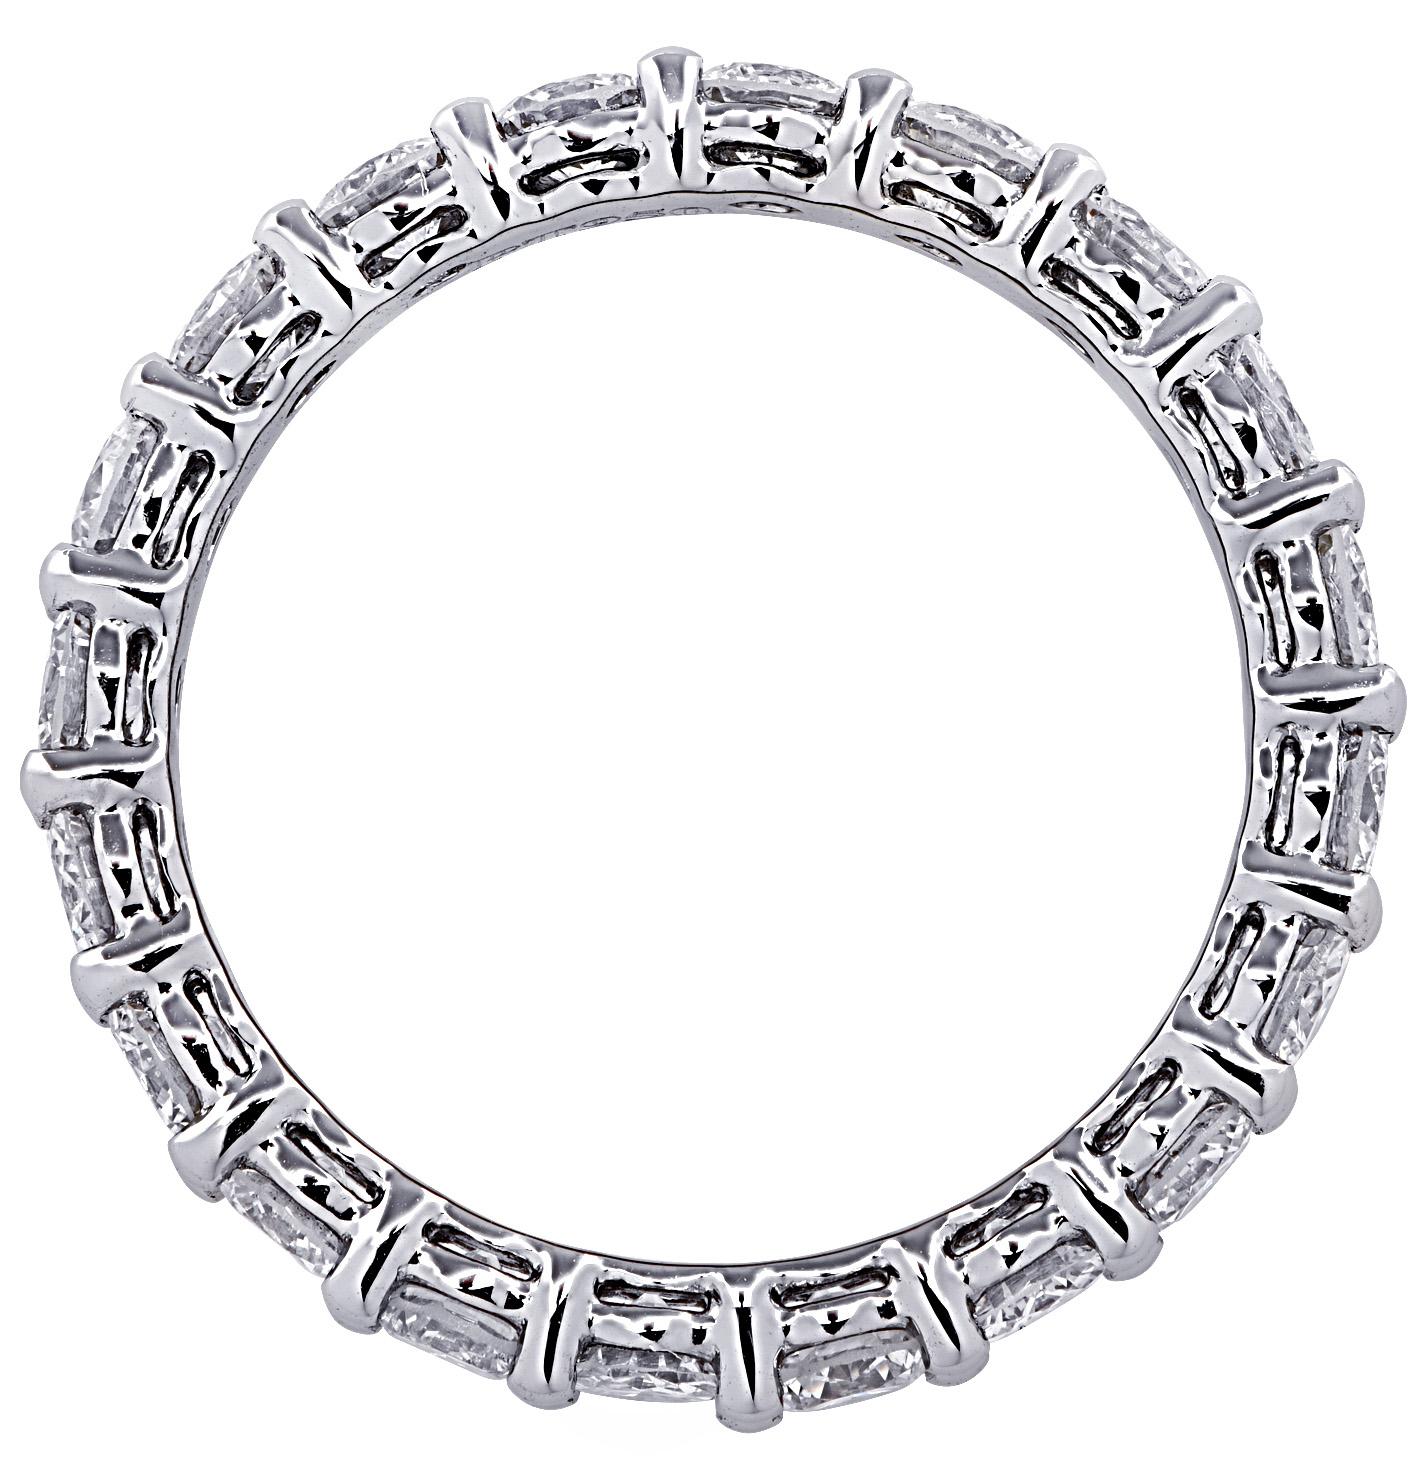 Exquisite Vivid Diamonds eternity band crafted in 18 karat white gold, showcasing 20 stunning round brilliant cut diamonds weighing 2.16 carats total, G color, VS-SI clarity. Each diamond is carefully selected, perfectly matched and set in a